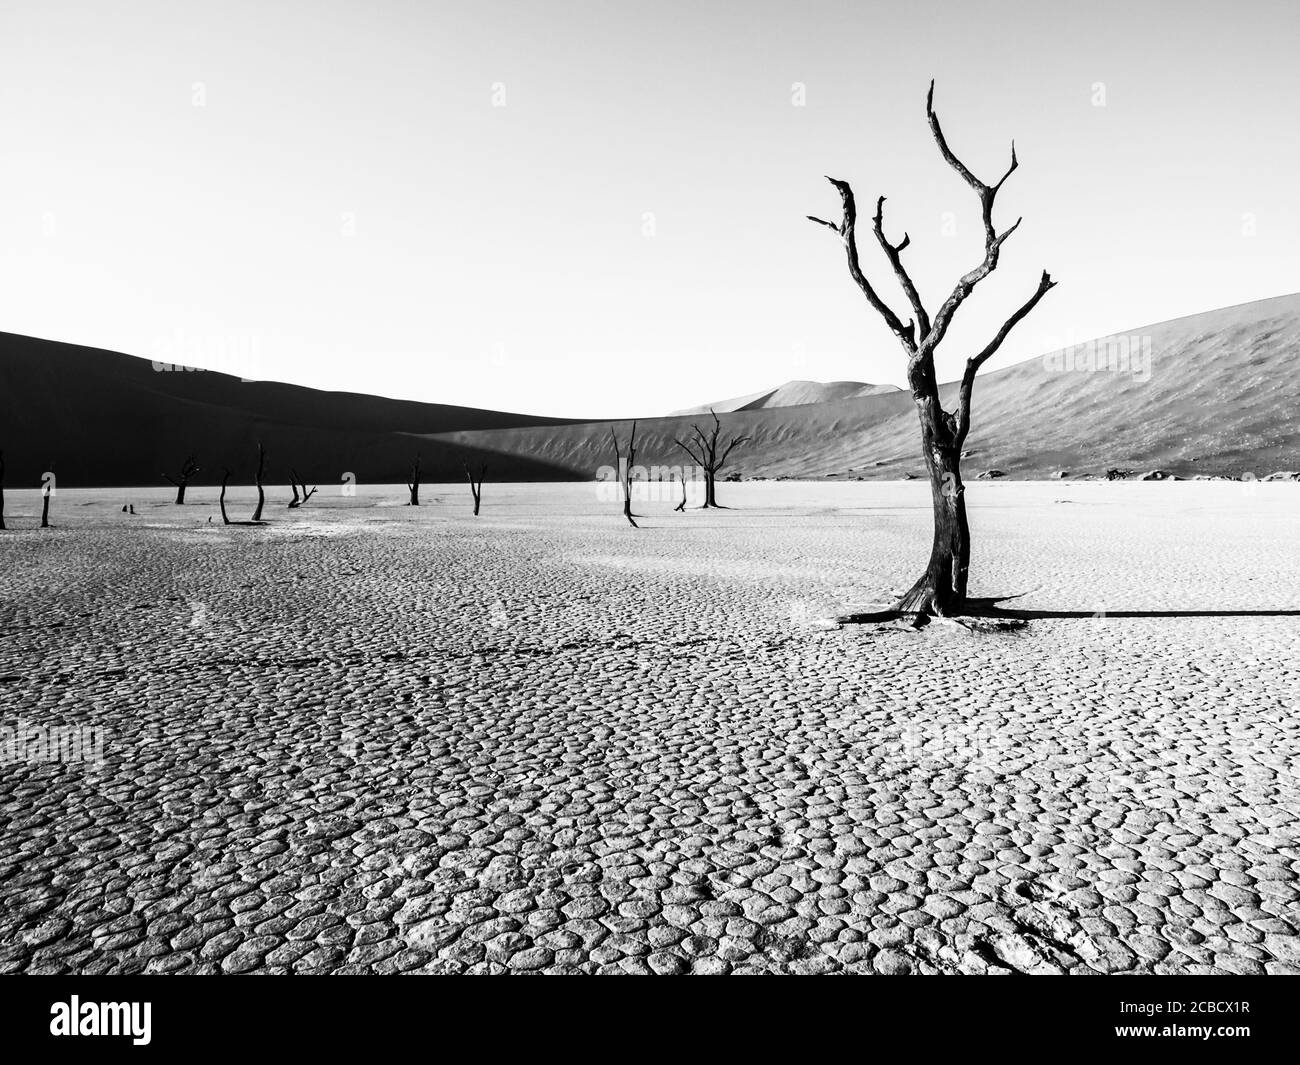 Desolated dry landscpe with dead camel thorn trees in Deadvlei pan with cracked soil in the middle of Namib Desert red dunes, near Sossusvlei, Namib-Naukluft National Park, Namibia, Africa. Black and white image. Stock Photo